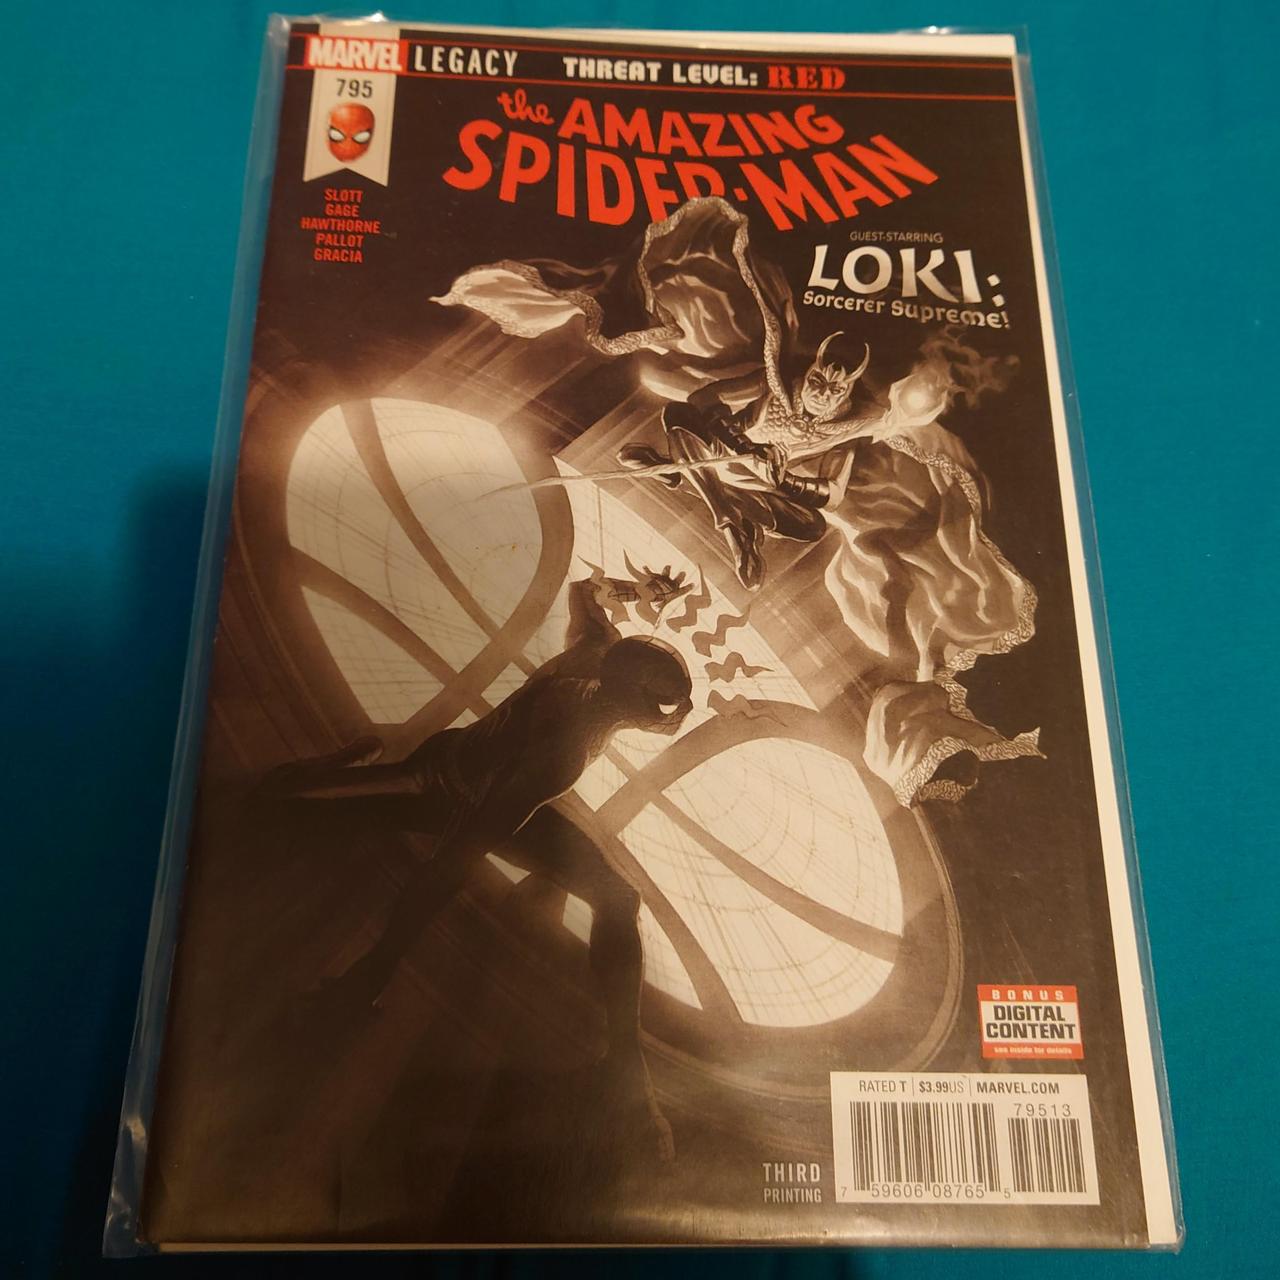 Product Image 2 - The Amazing Spider-Man Issues 794,